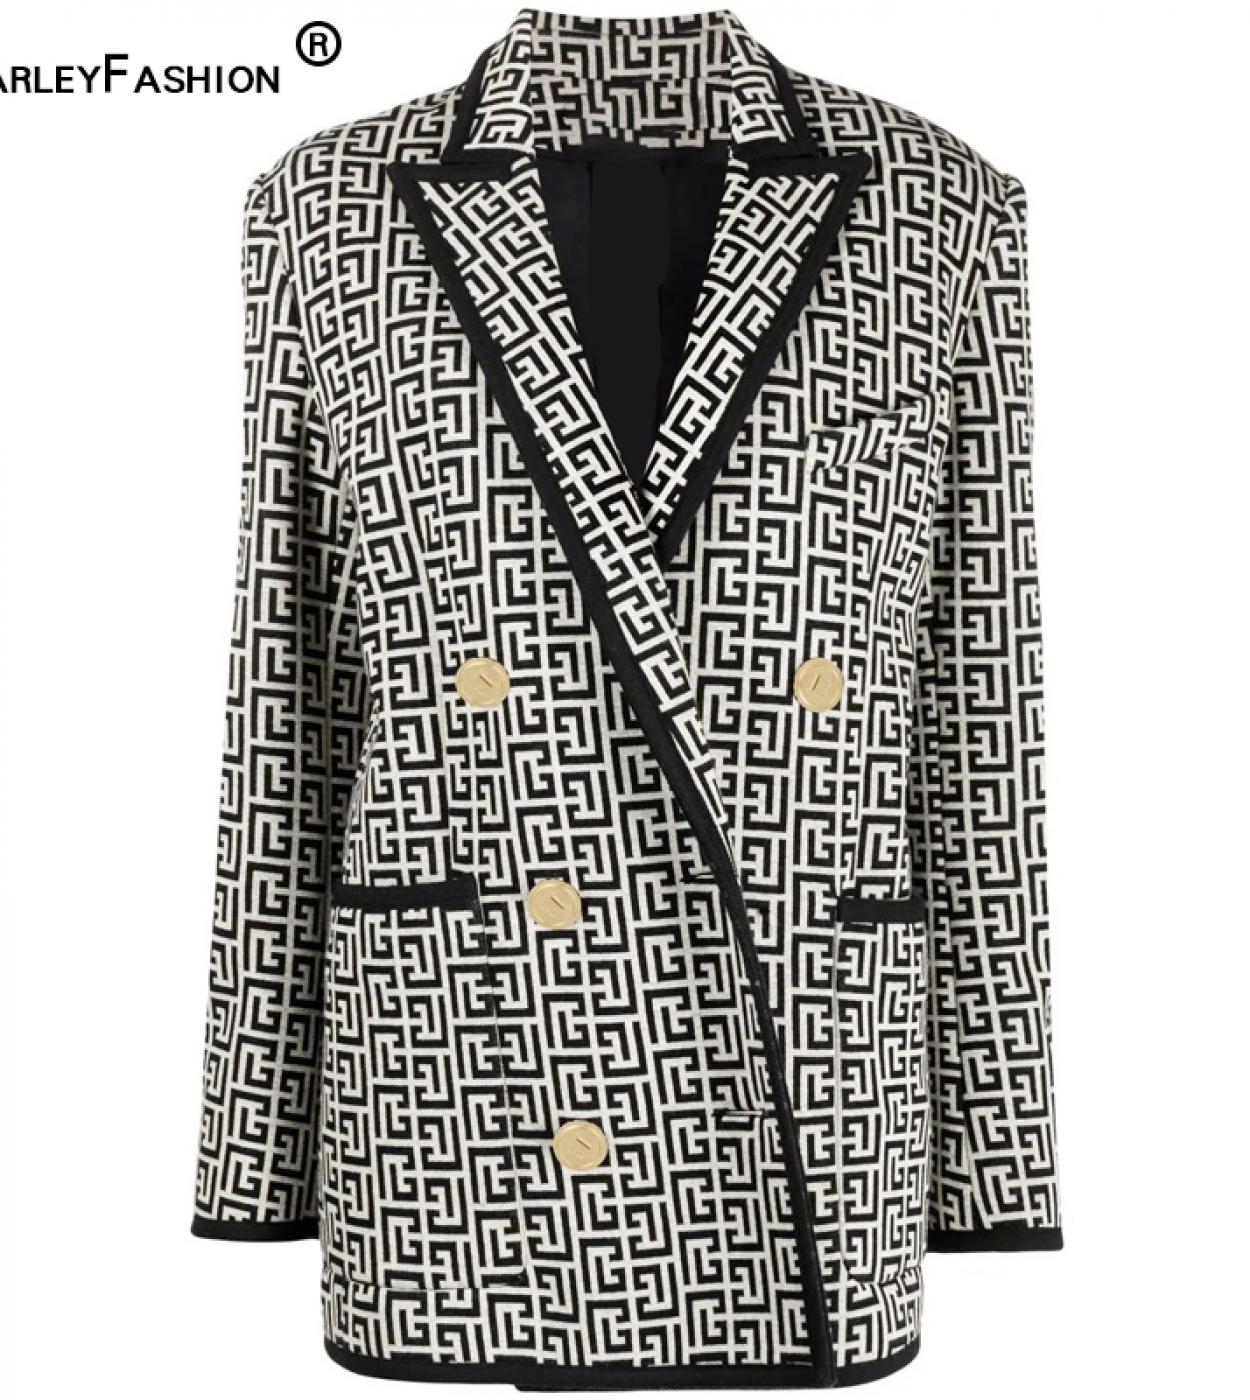  Ladies Spring High Street Classic Featured Fabric Geometric Texture Patchwork Jacket Lion Head Buckle Notched Blazer